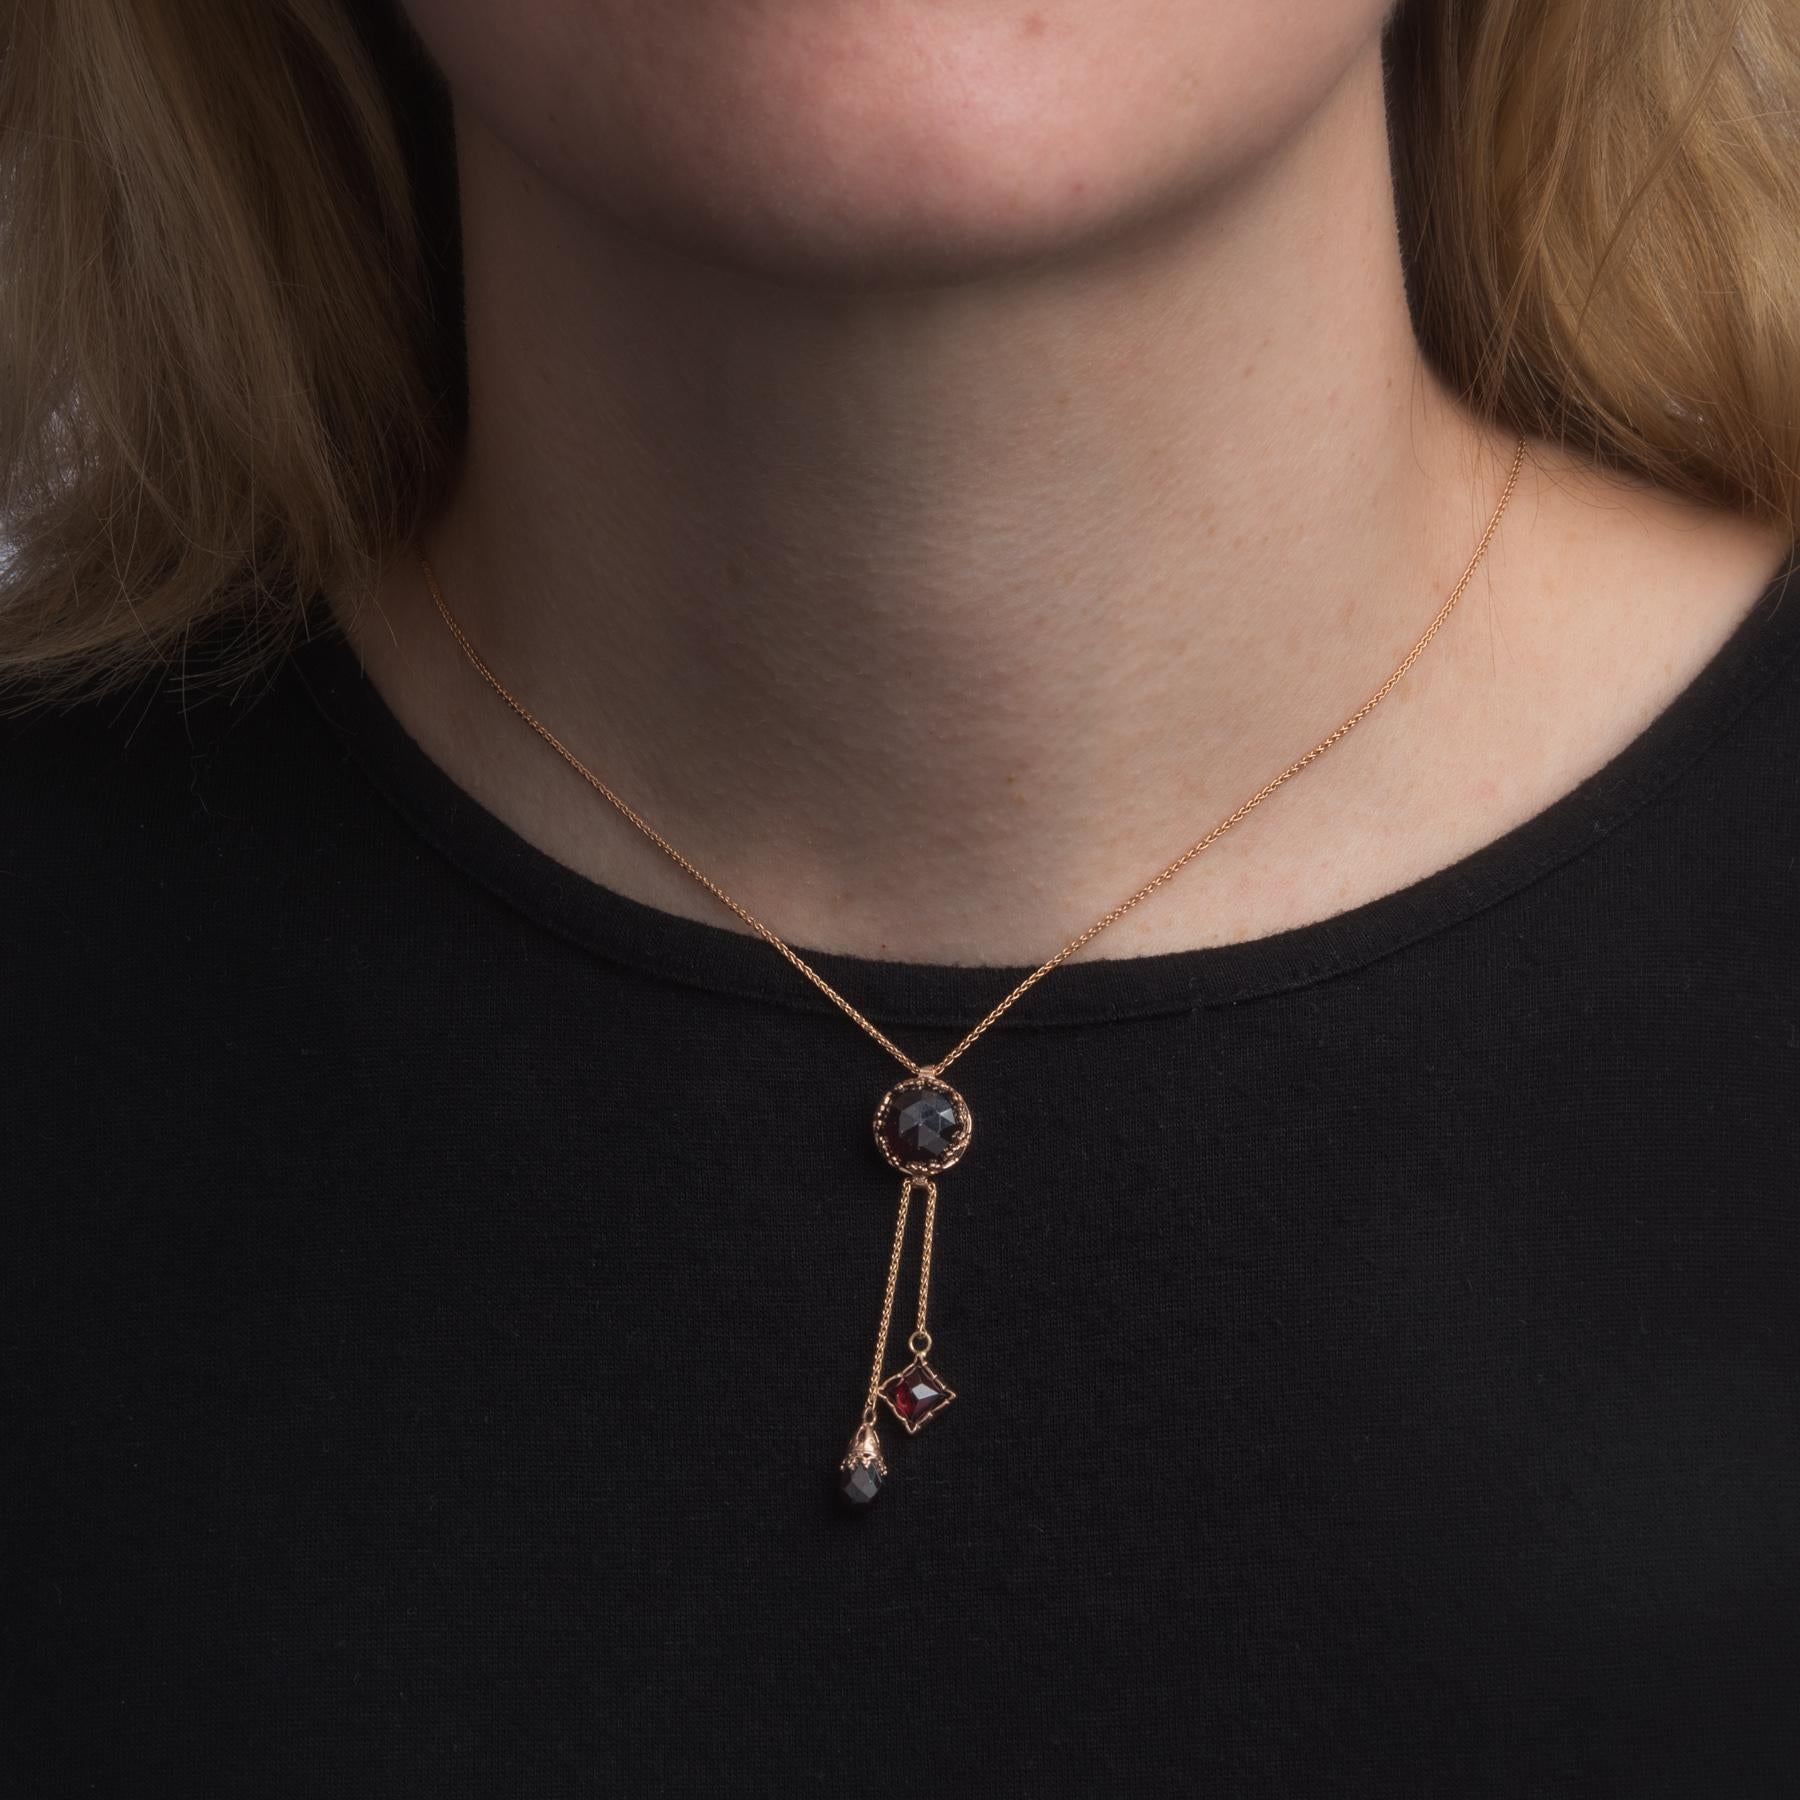 Finely detailed garnet drop necklace, crafted in 14 karat rose gold.  

Checkerboard faceted round cut garnet measures 10mm (estimated at 5 carats), accented with two 5mm garnets (lower) that are estimated at 1 carat each. The total garnet weight is